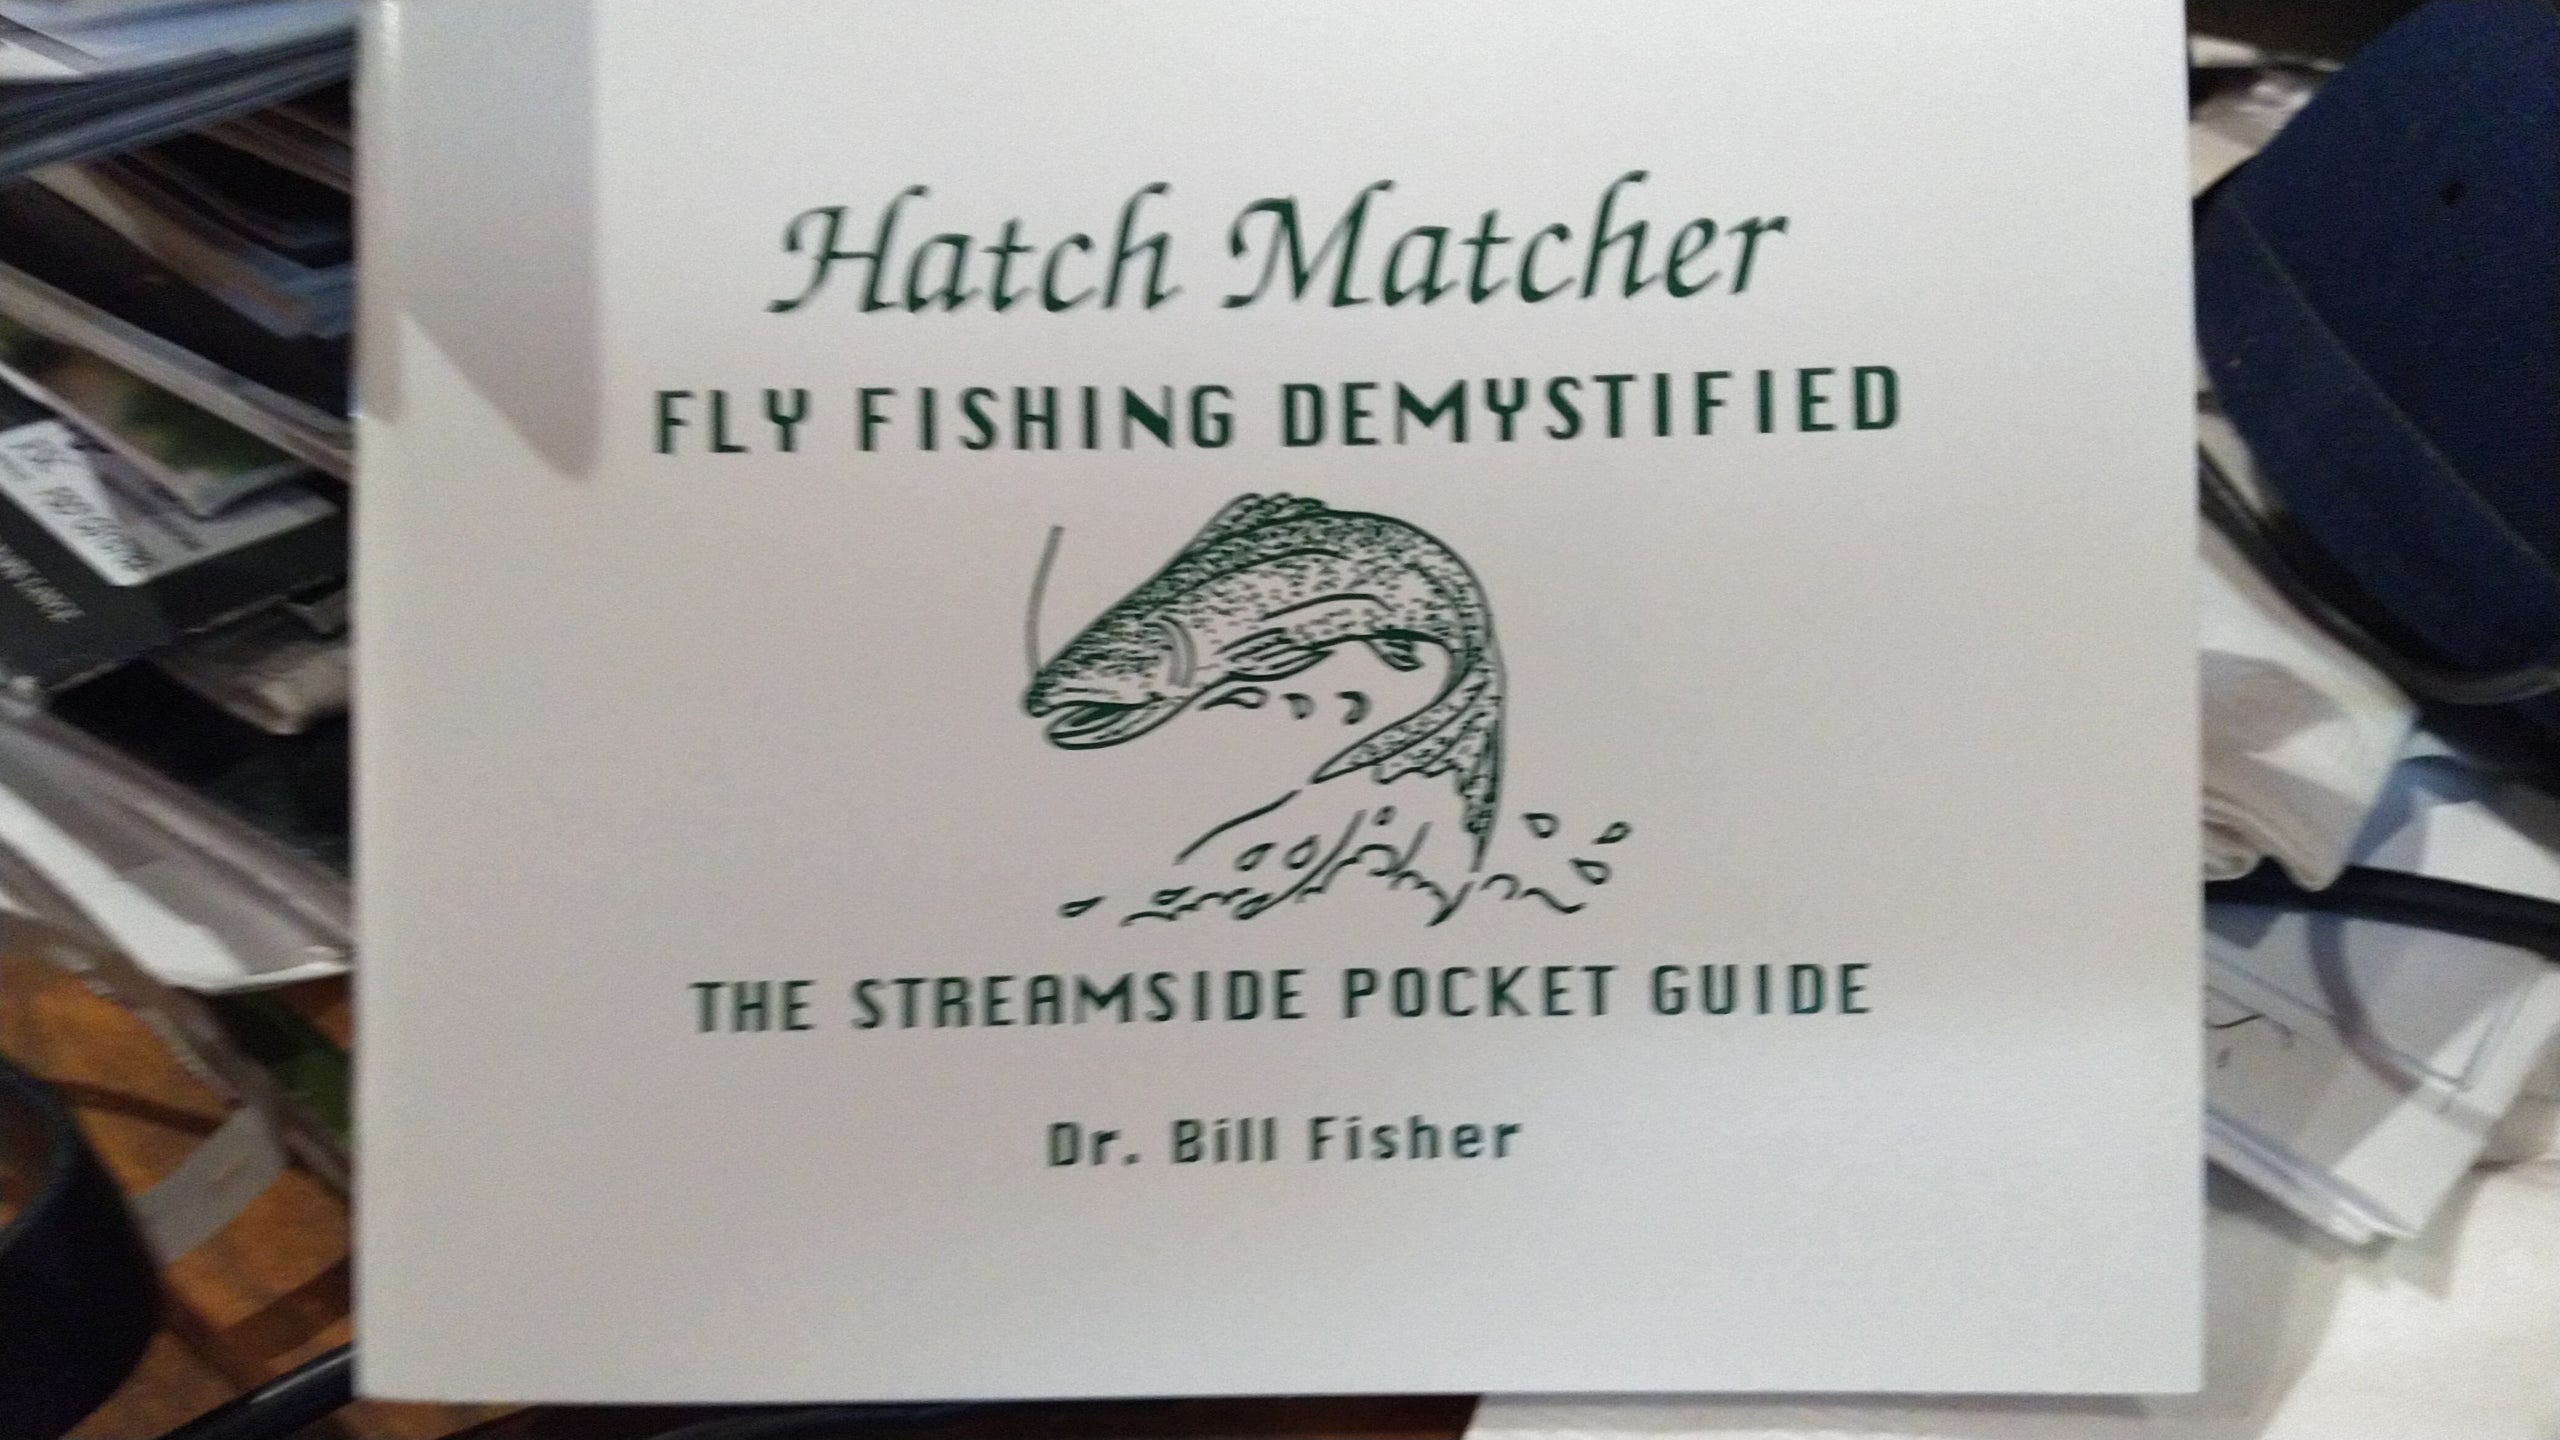 Hatch Matcher Fly Fishing Demystefied Streamside Pocket Guide